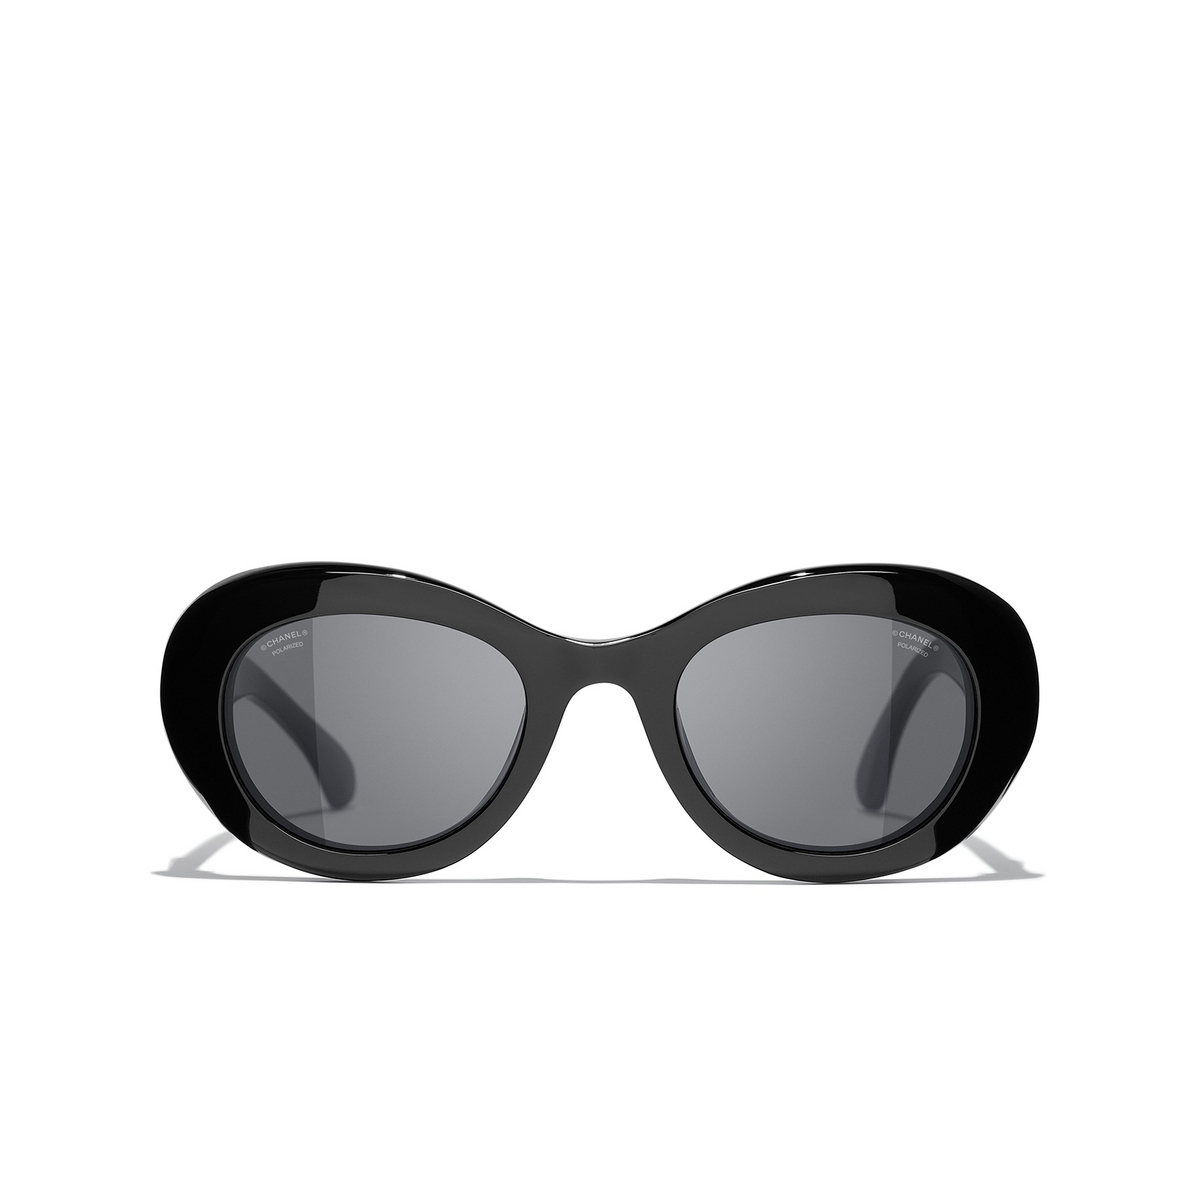 CHANEL oval Sunglasses C622T8 Black - front view